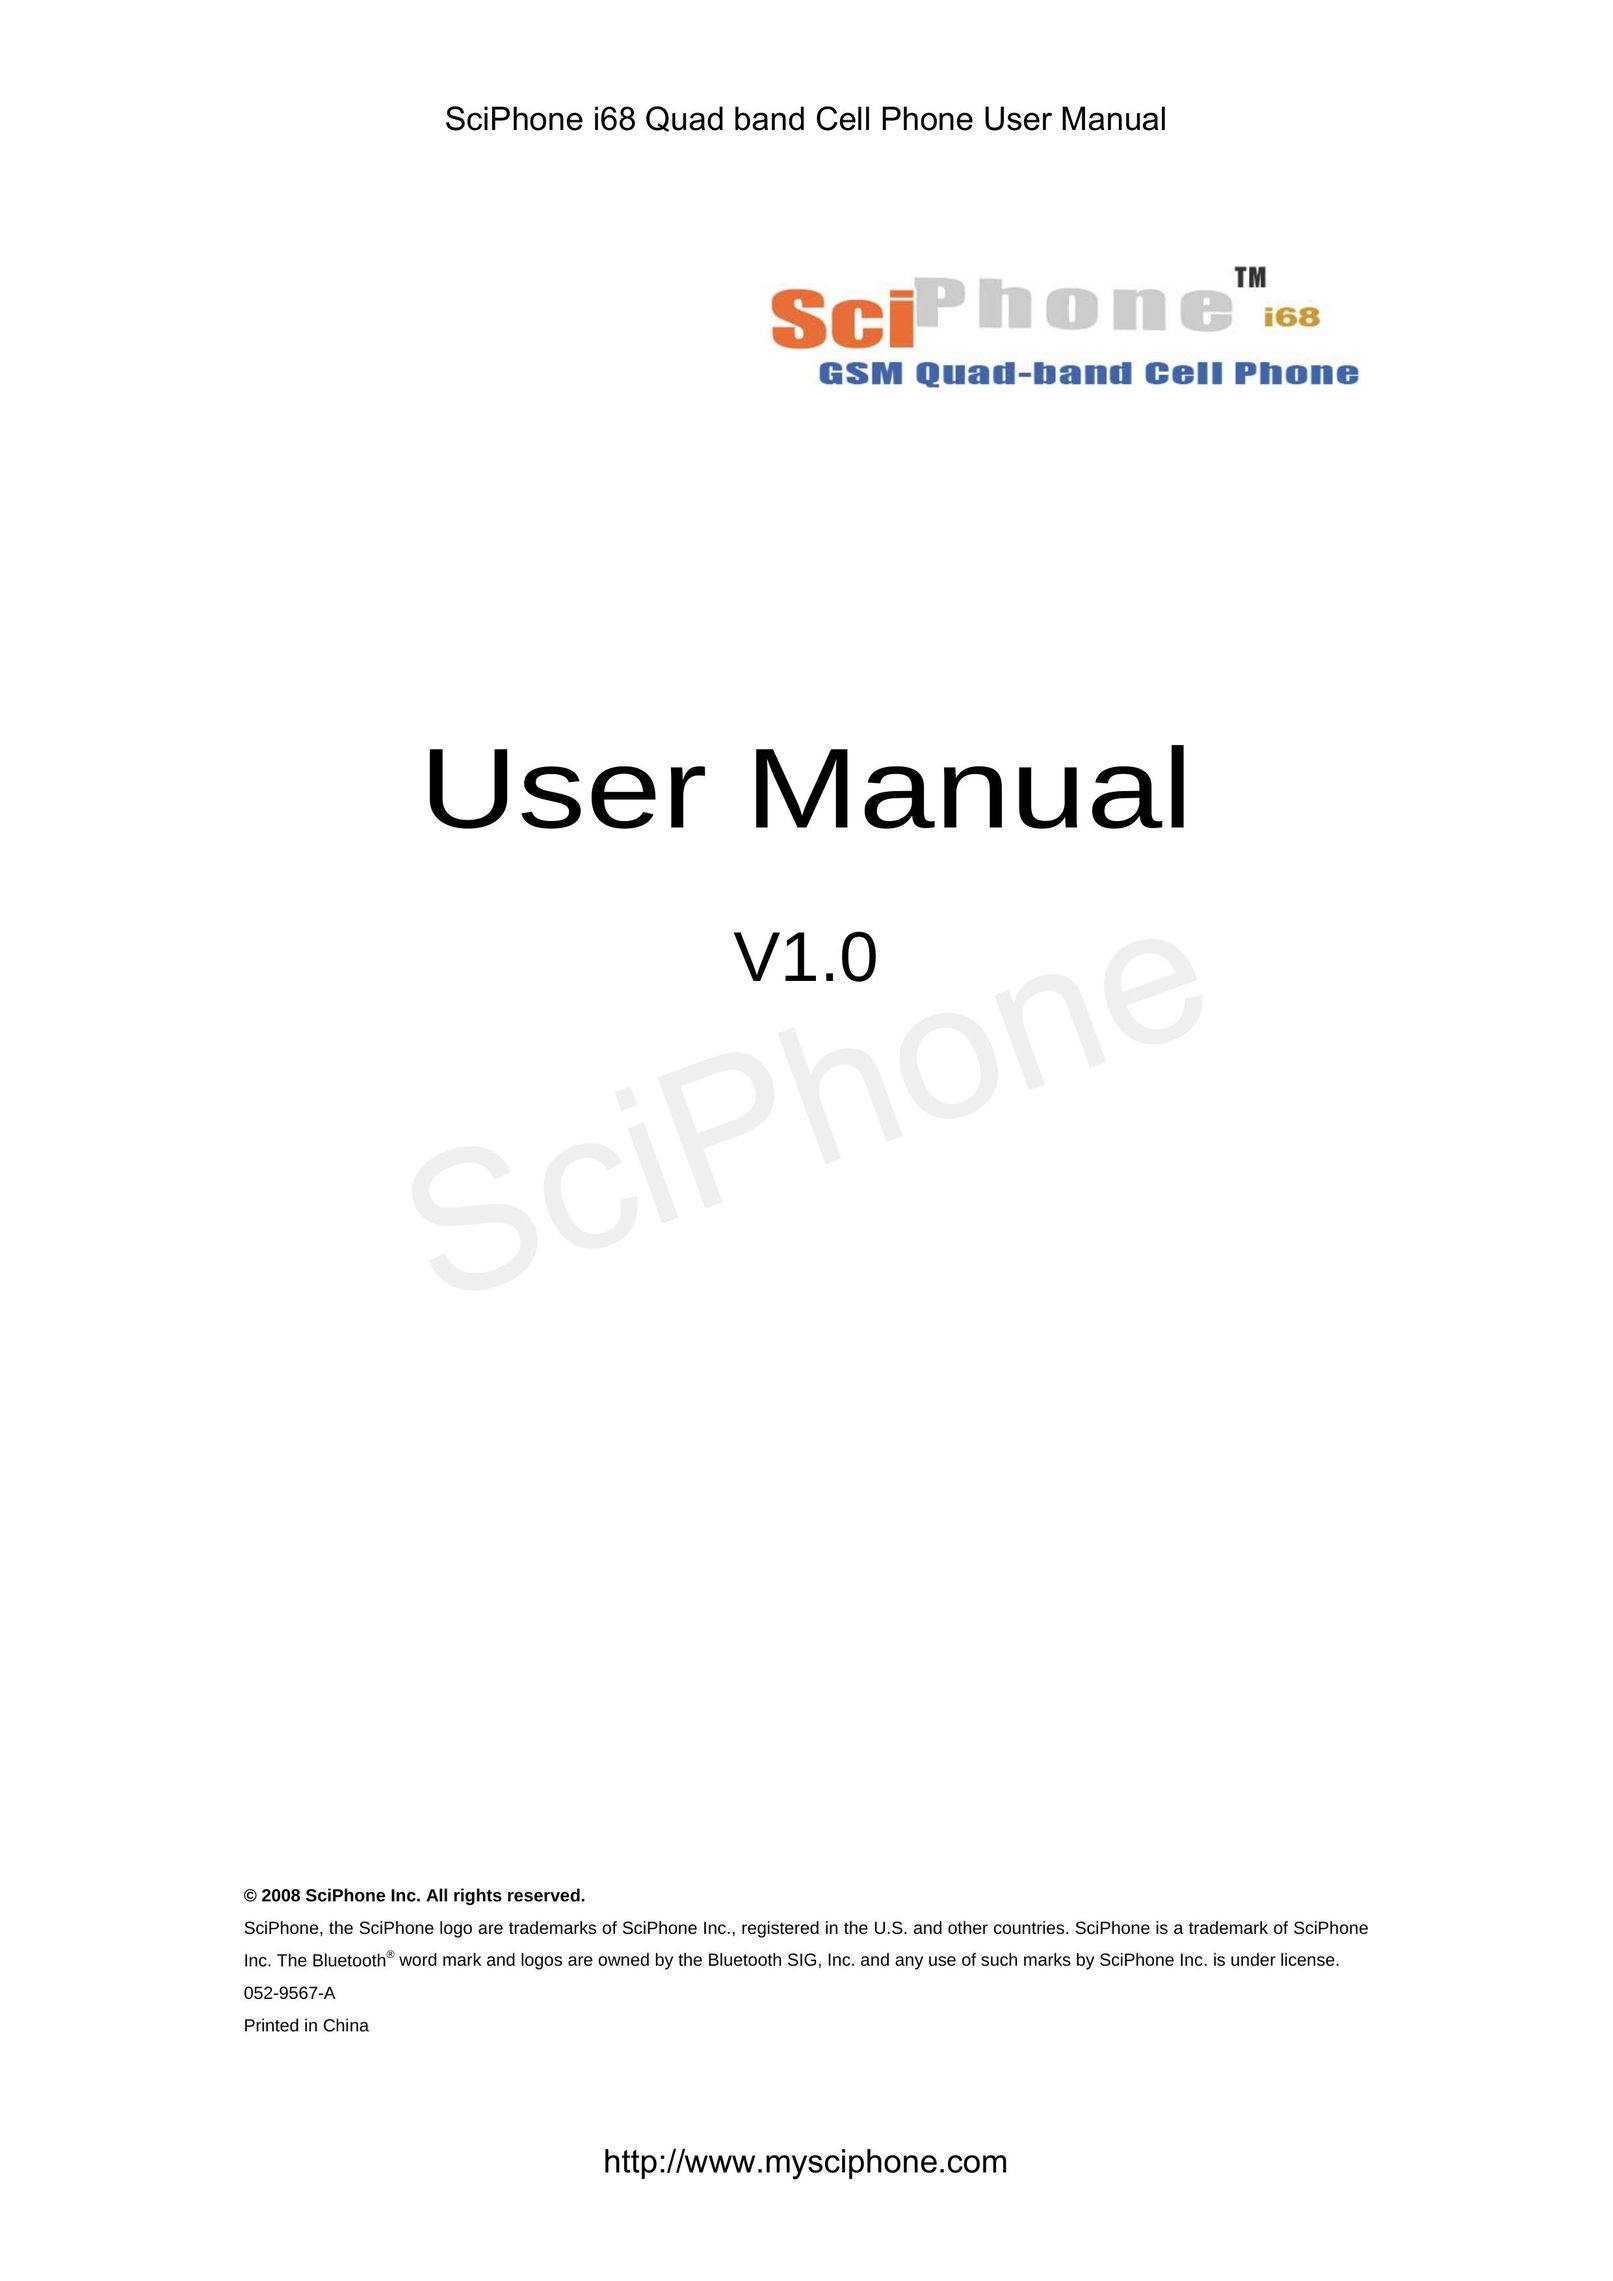 SciPhone I68 Cell Phone User Manual